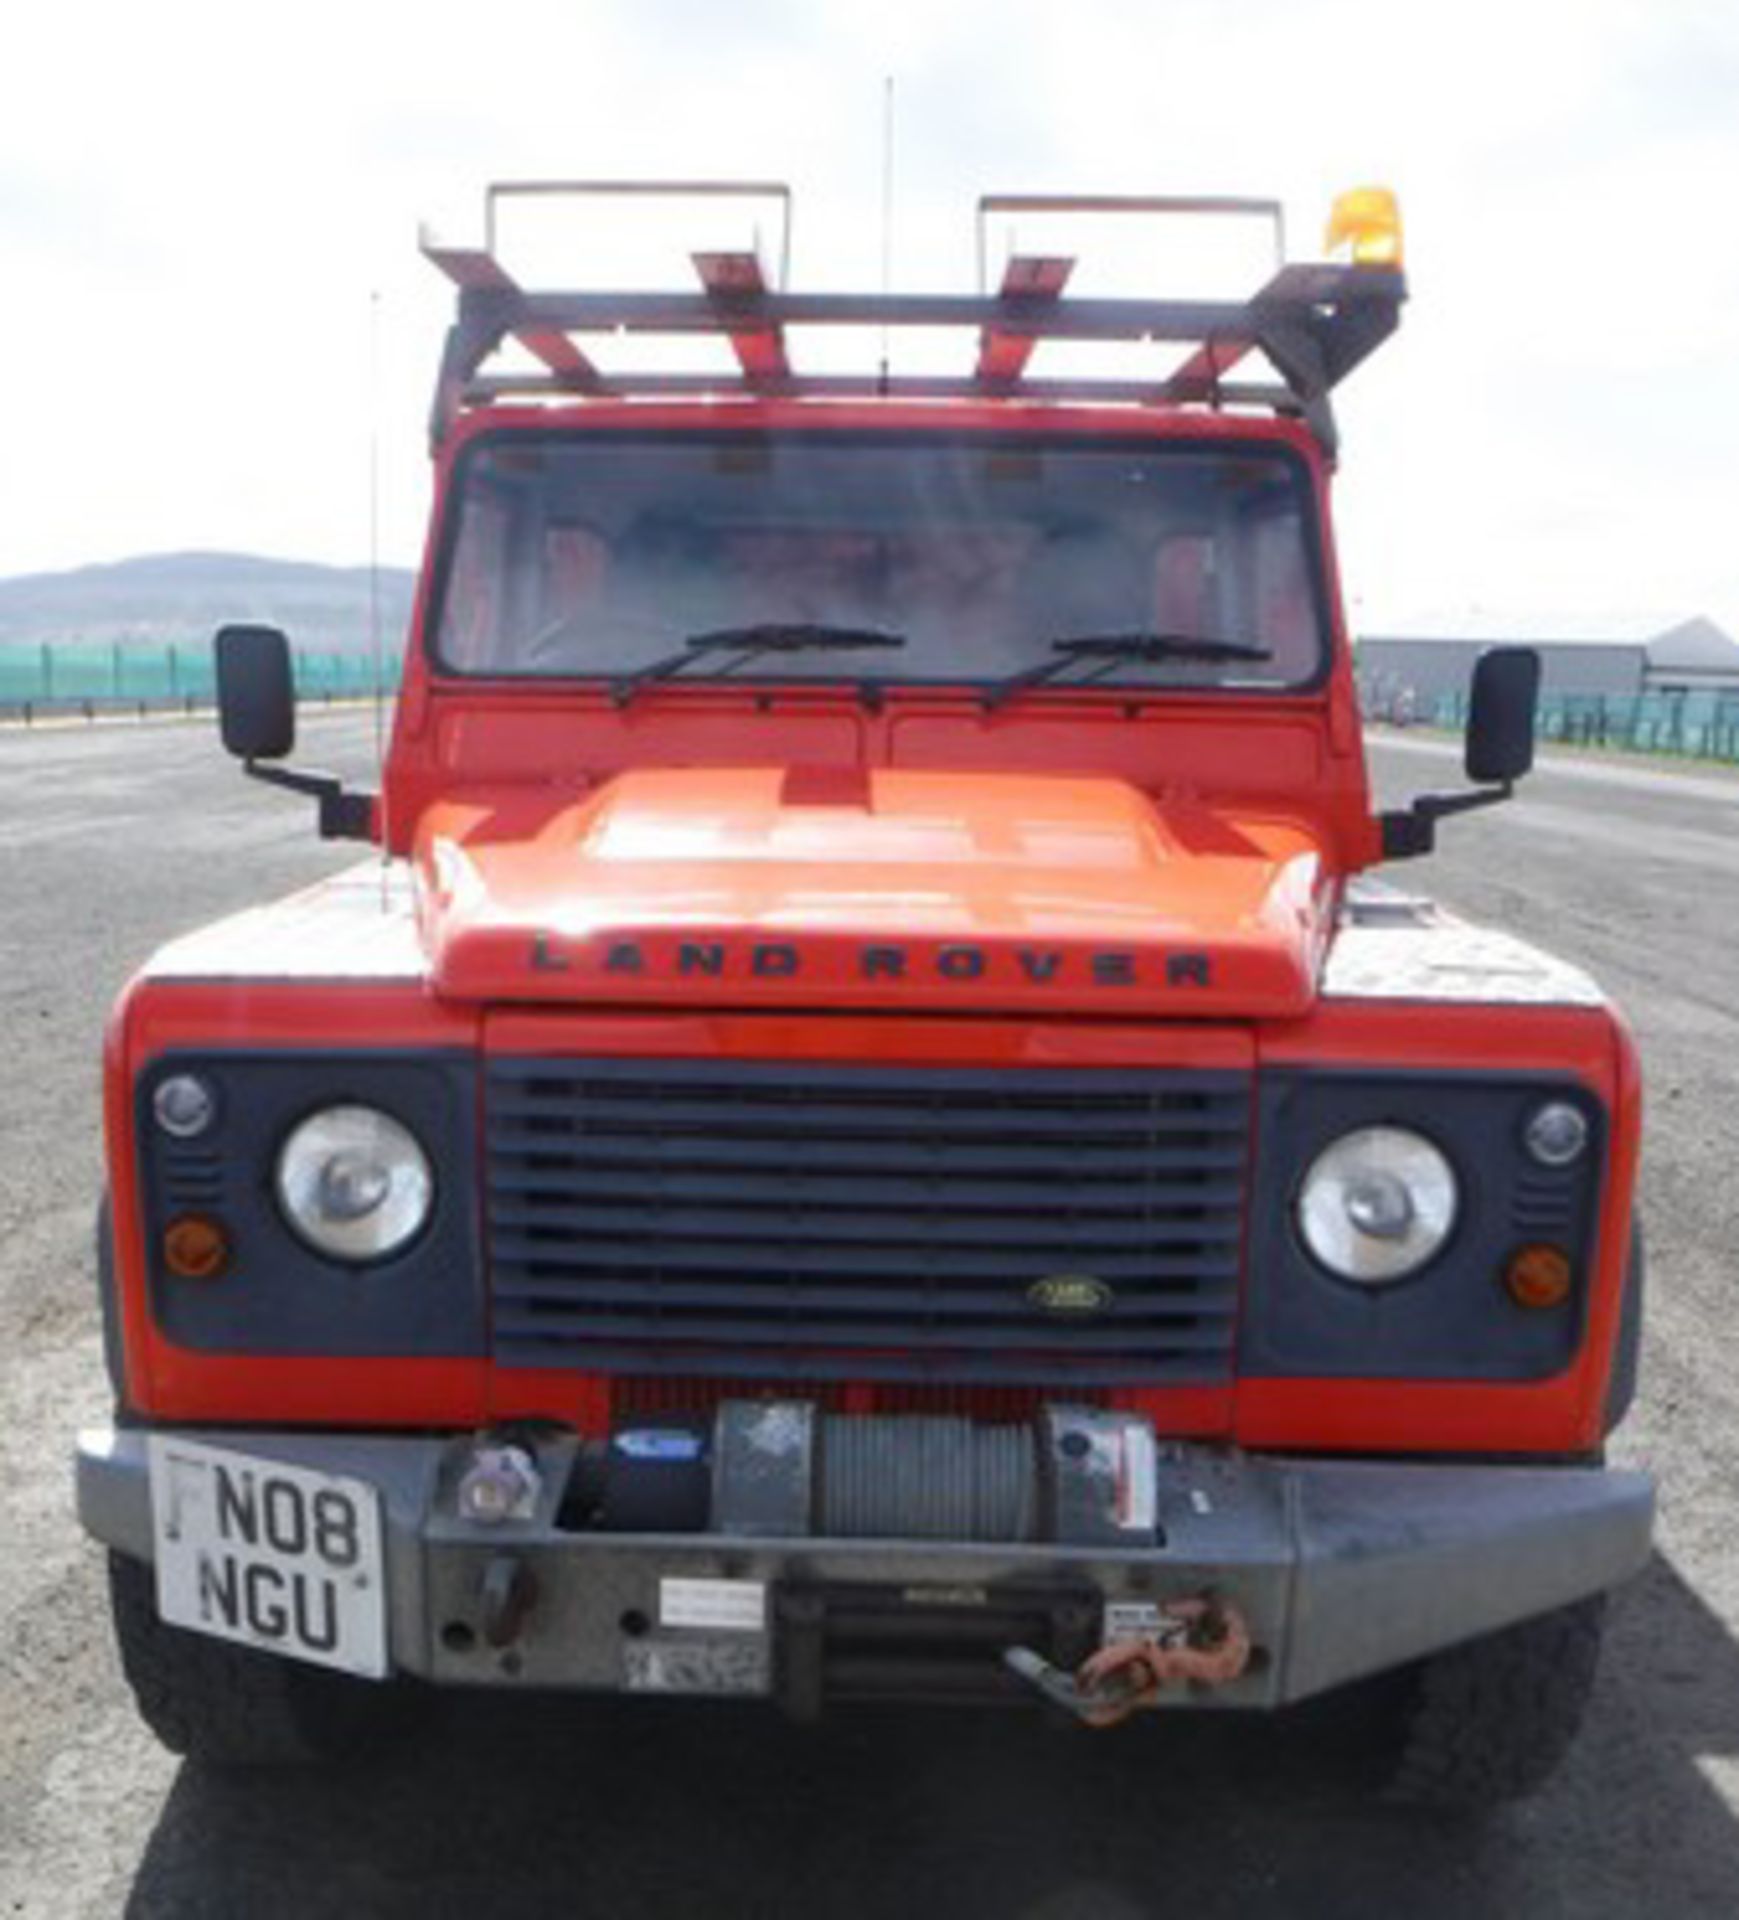 LAND ROVER DEFENDER 130 S/C - 2402cc - Image 12 of 26